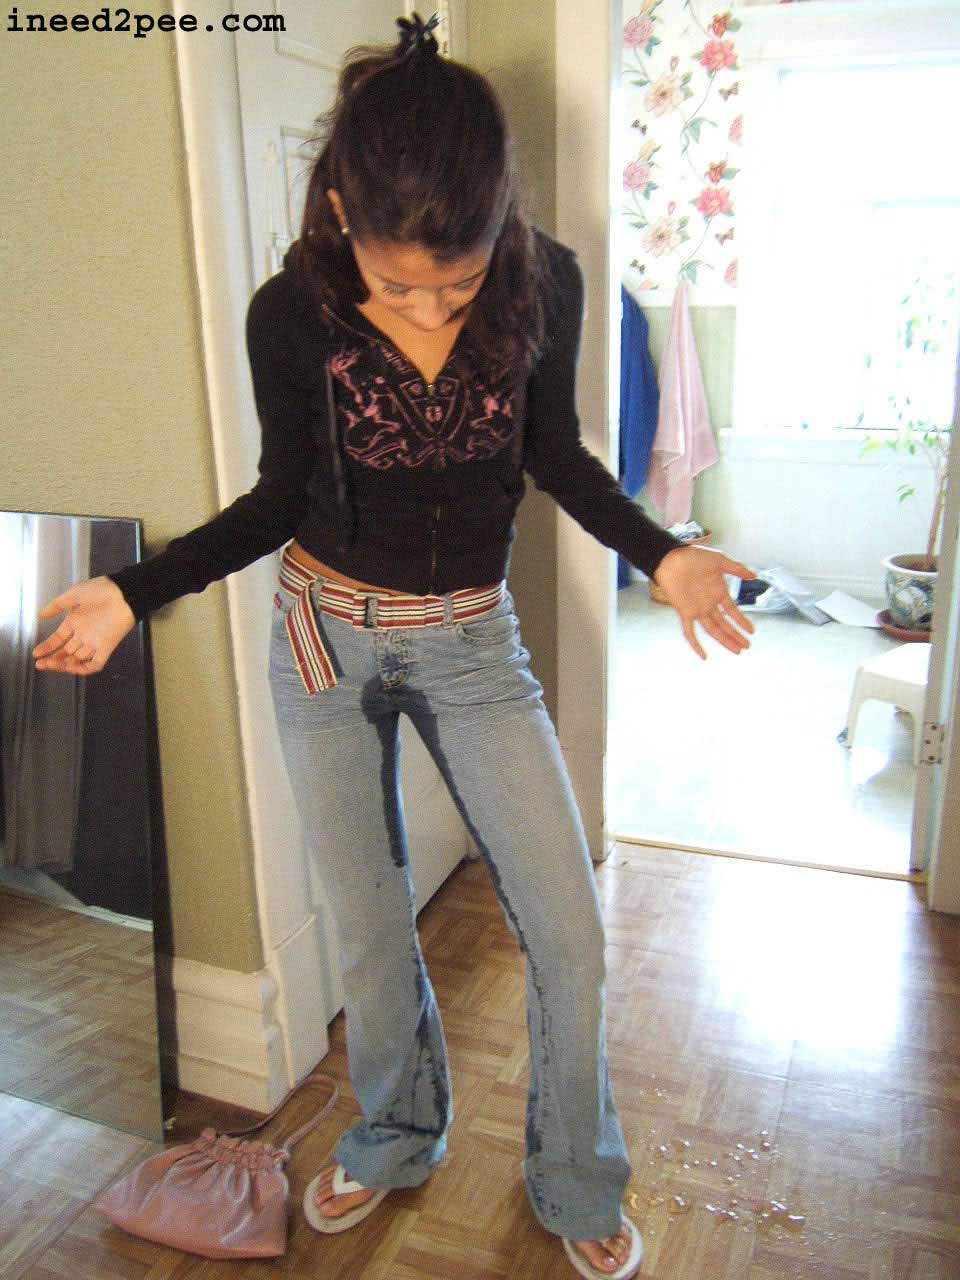 Ineed2pee Pissing In Her Jeans.